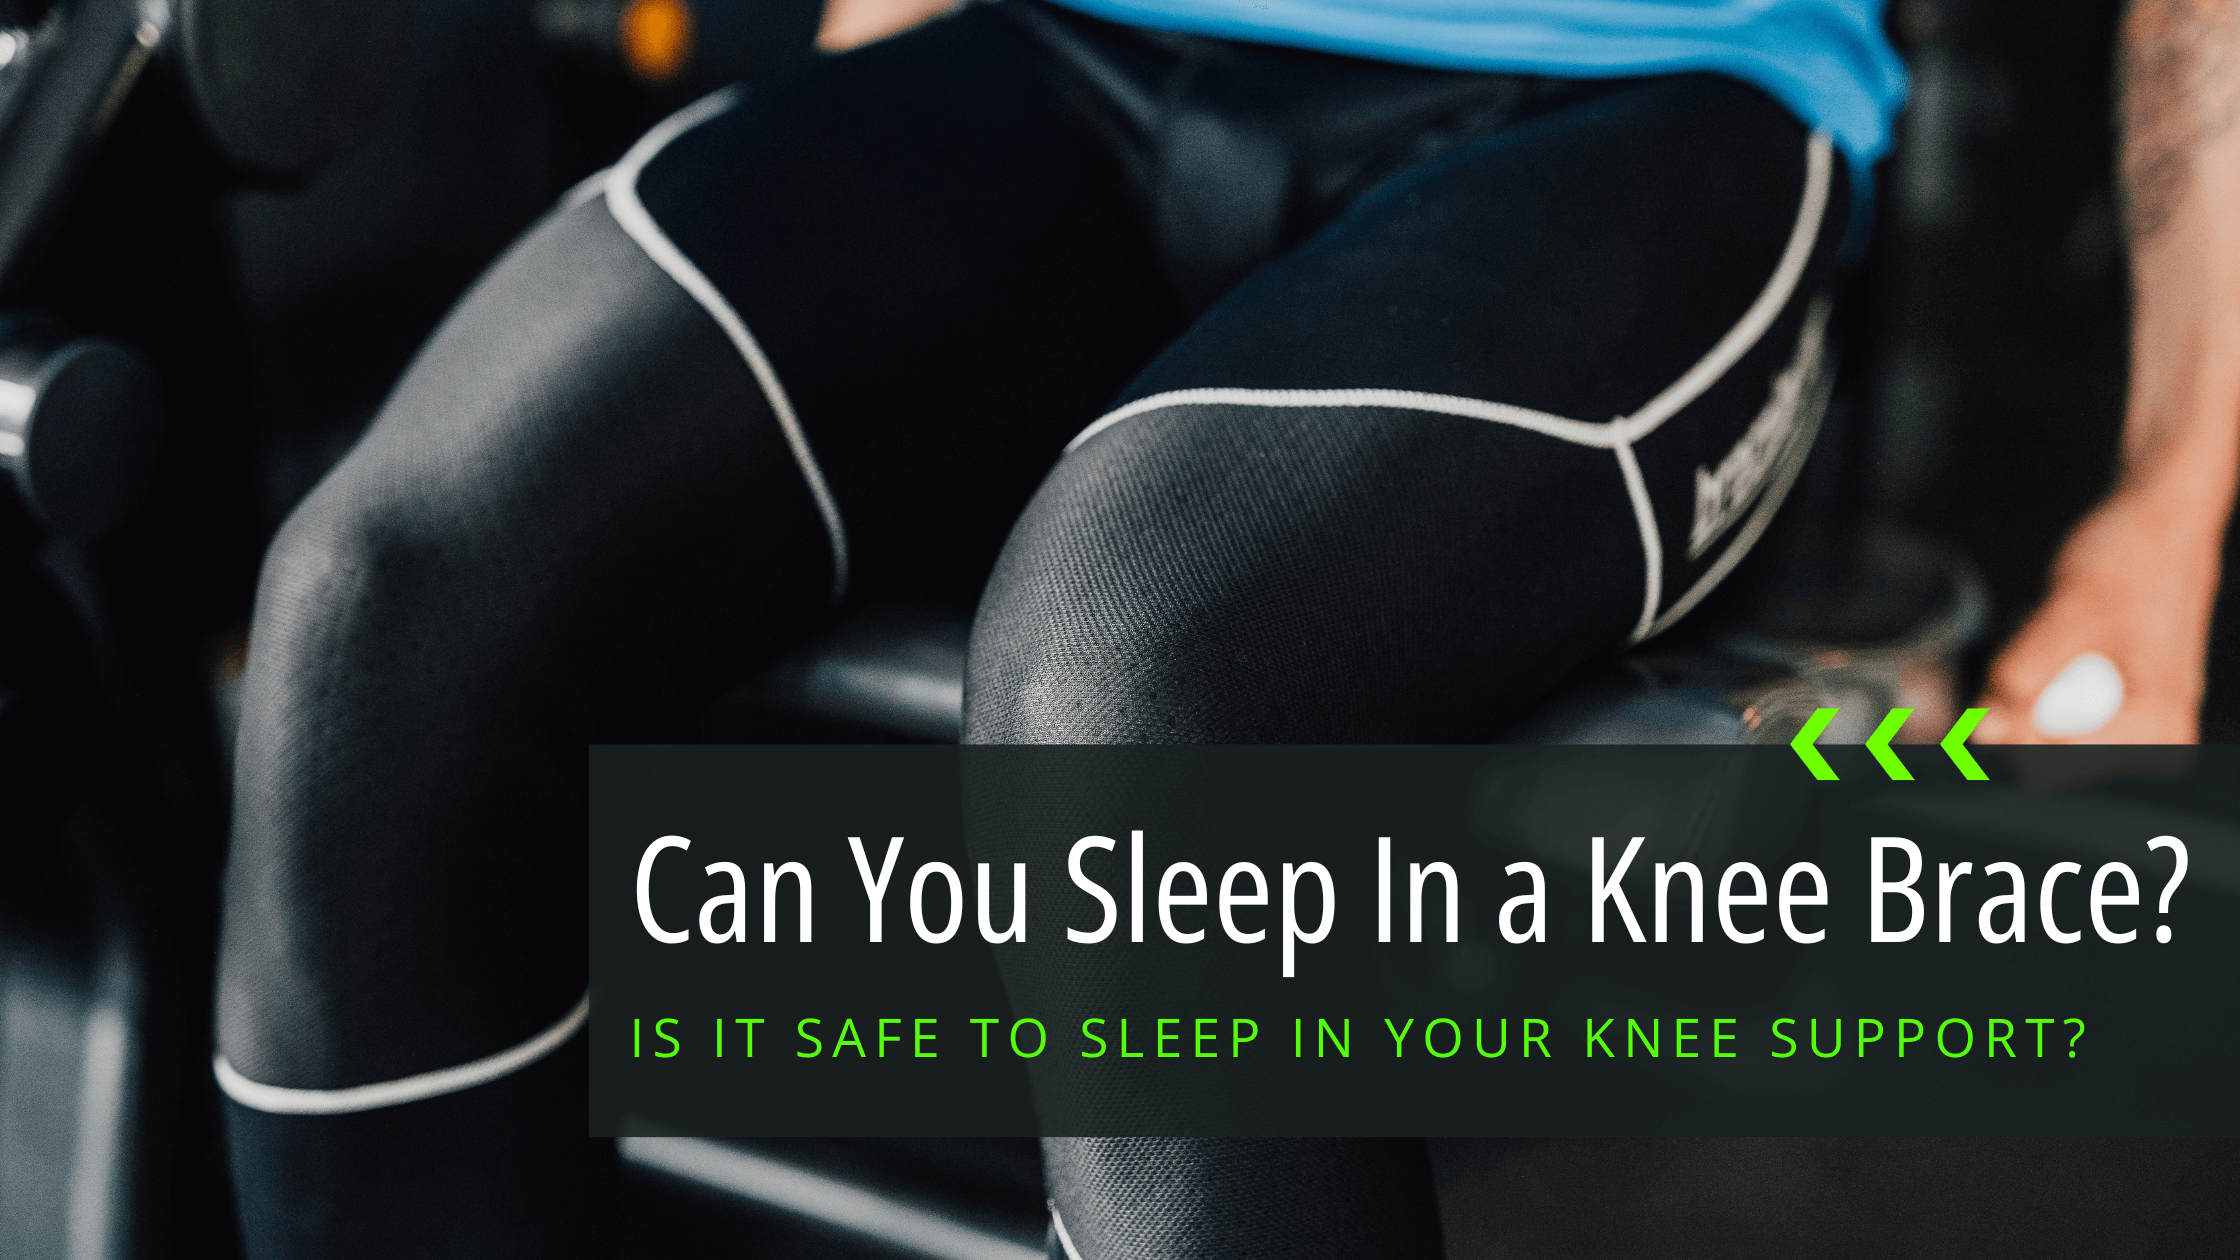 Blog header for "Can you sleep in a knee brace or knee compression sleeves?" Learn more about sleeping in a knee brace, sleep in knee brace, do doctors recommend sleeping in knee braces?